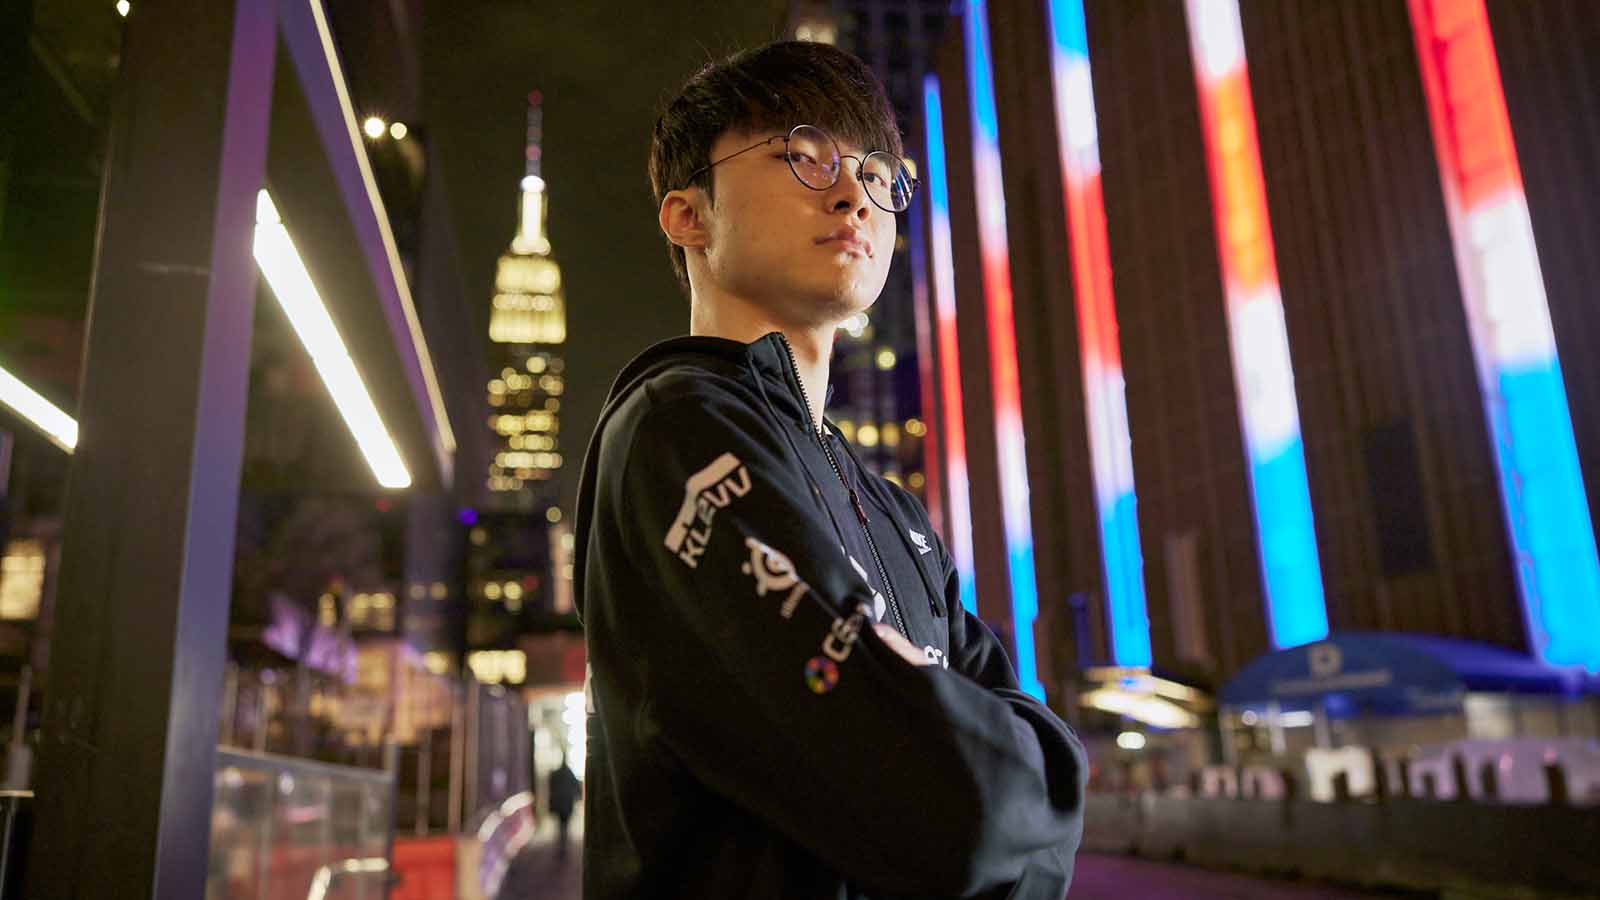 T1 crush Weibo Gaming to earn Faker a fourth title: LoL Worlds